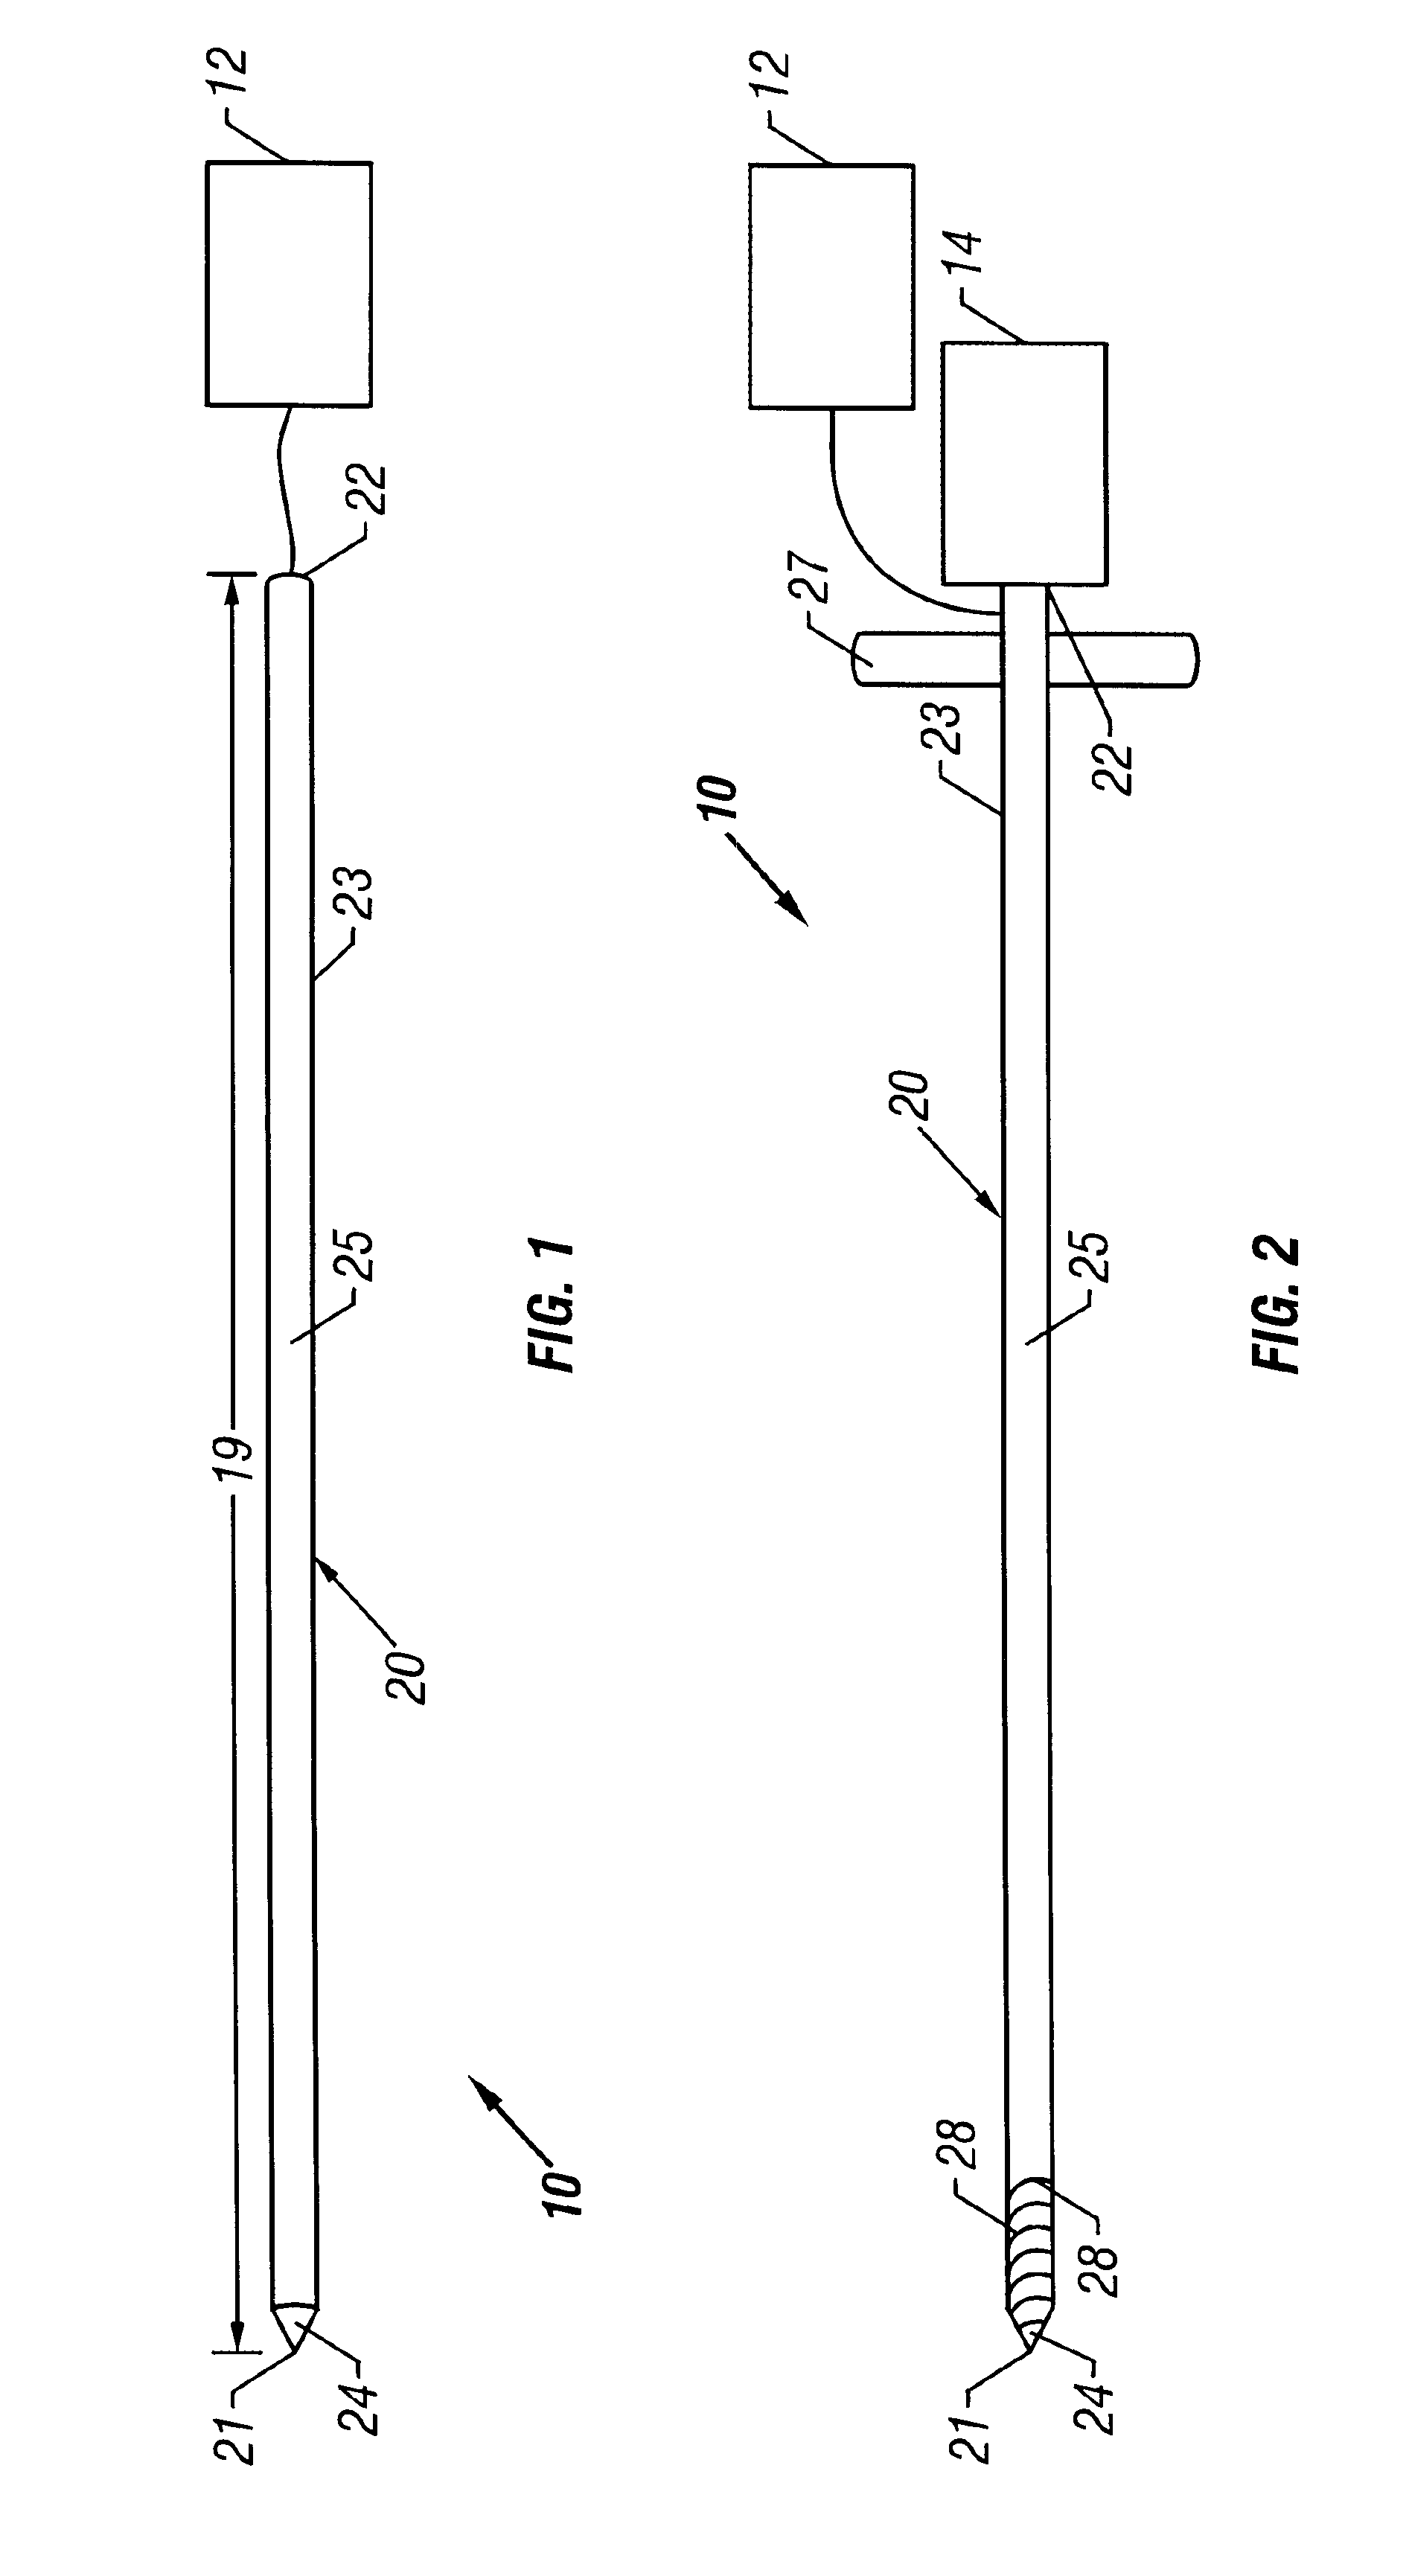 Methods and devices for intraosseous nerve ablation